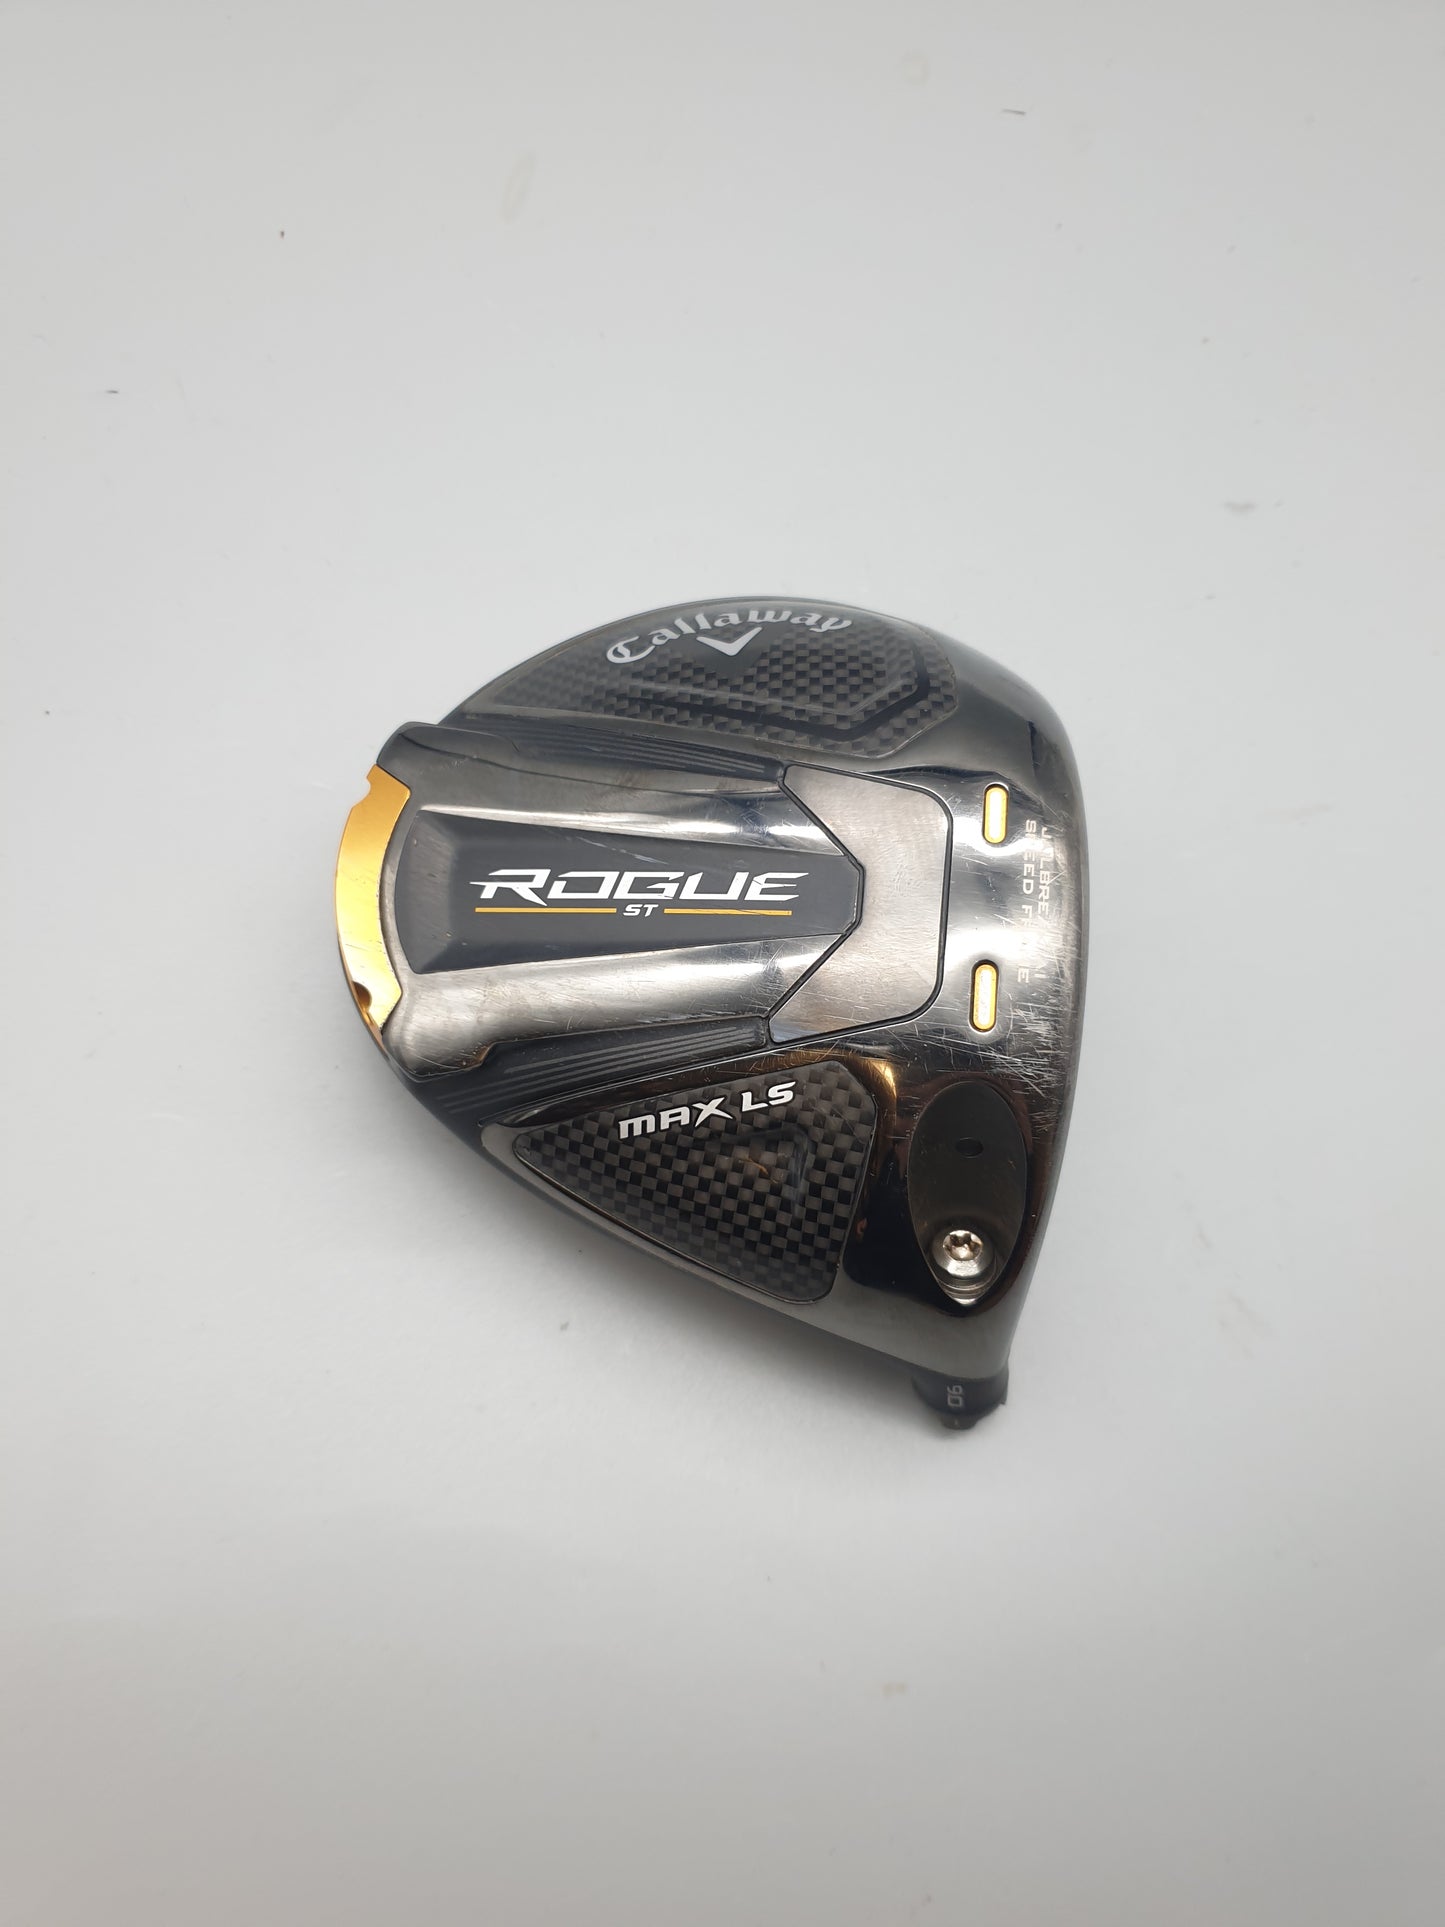 Callaway Rogue Max LS 9.0 Kaili White 60S Right Hand - Used